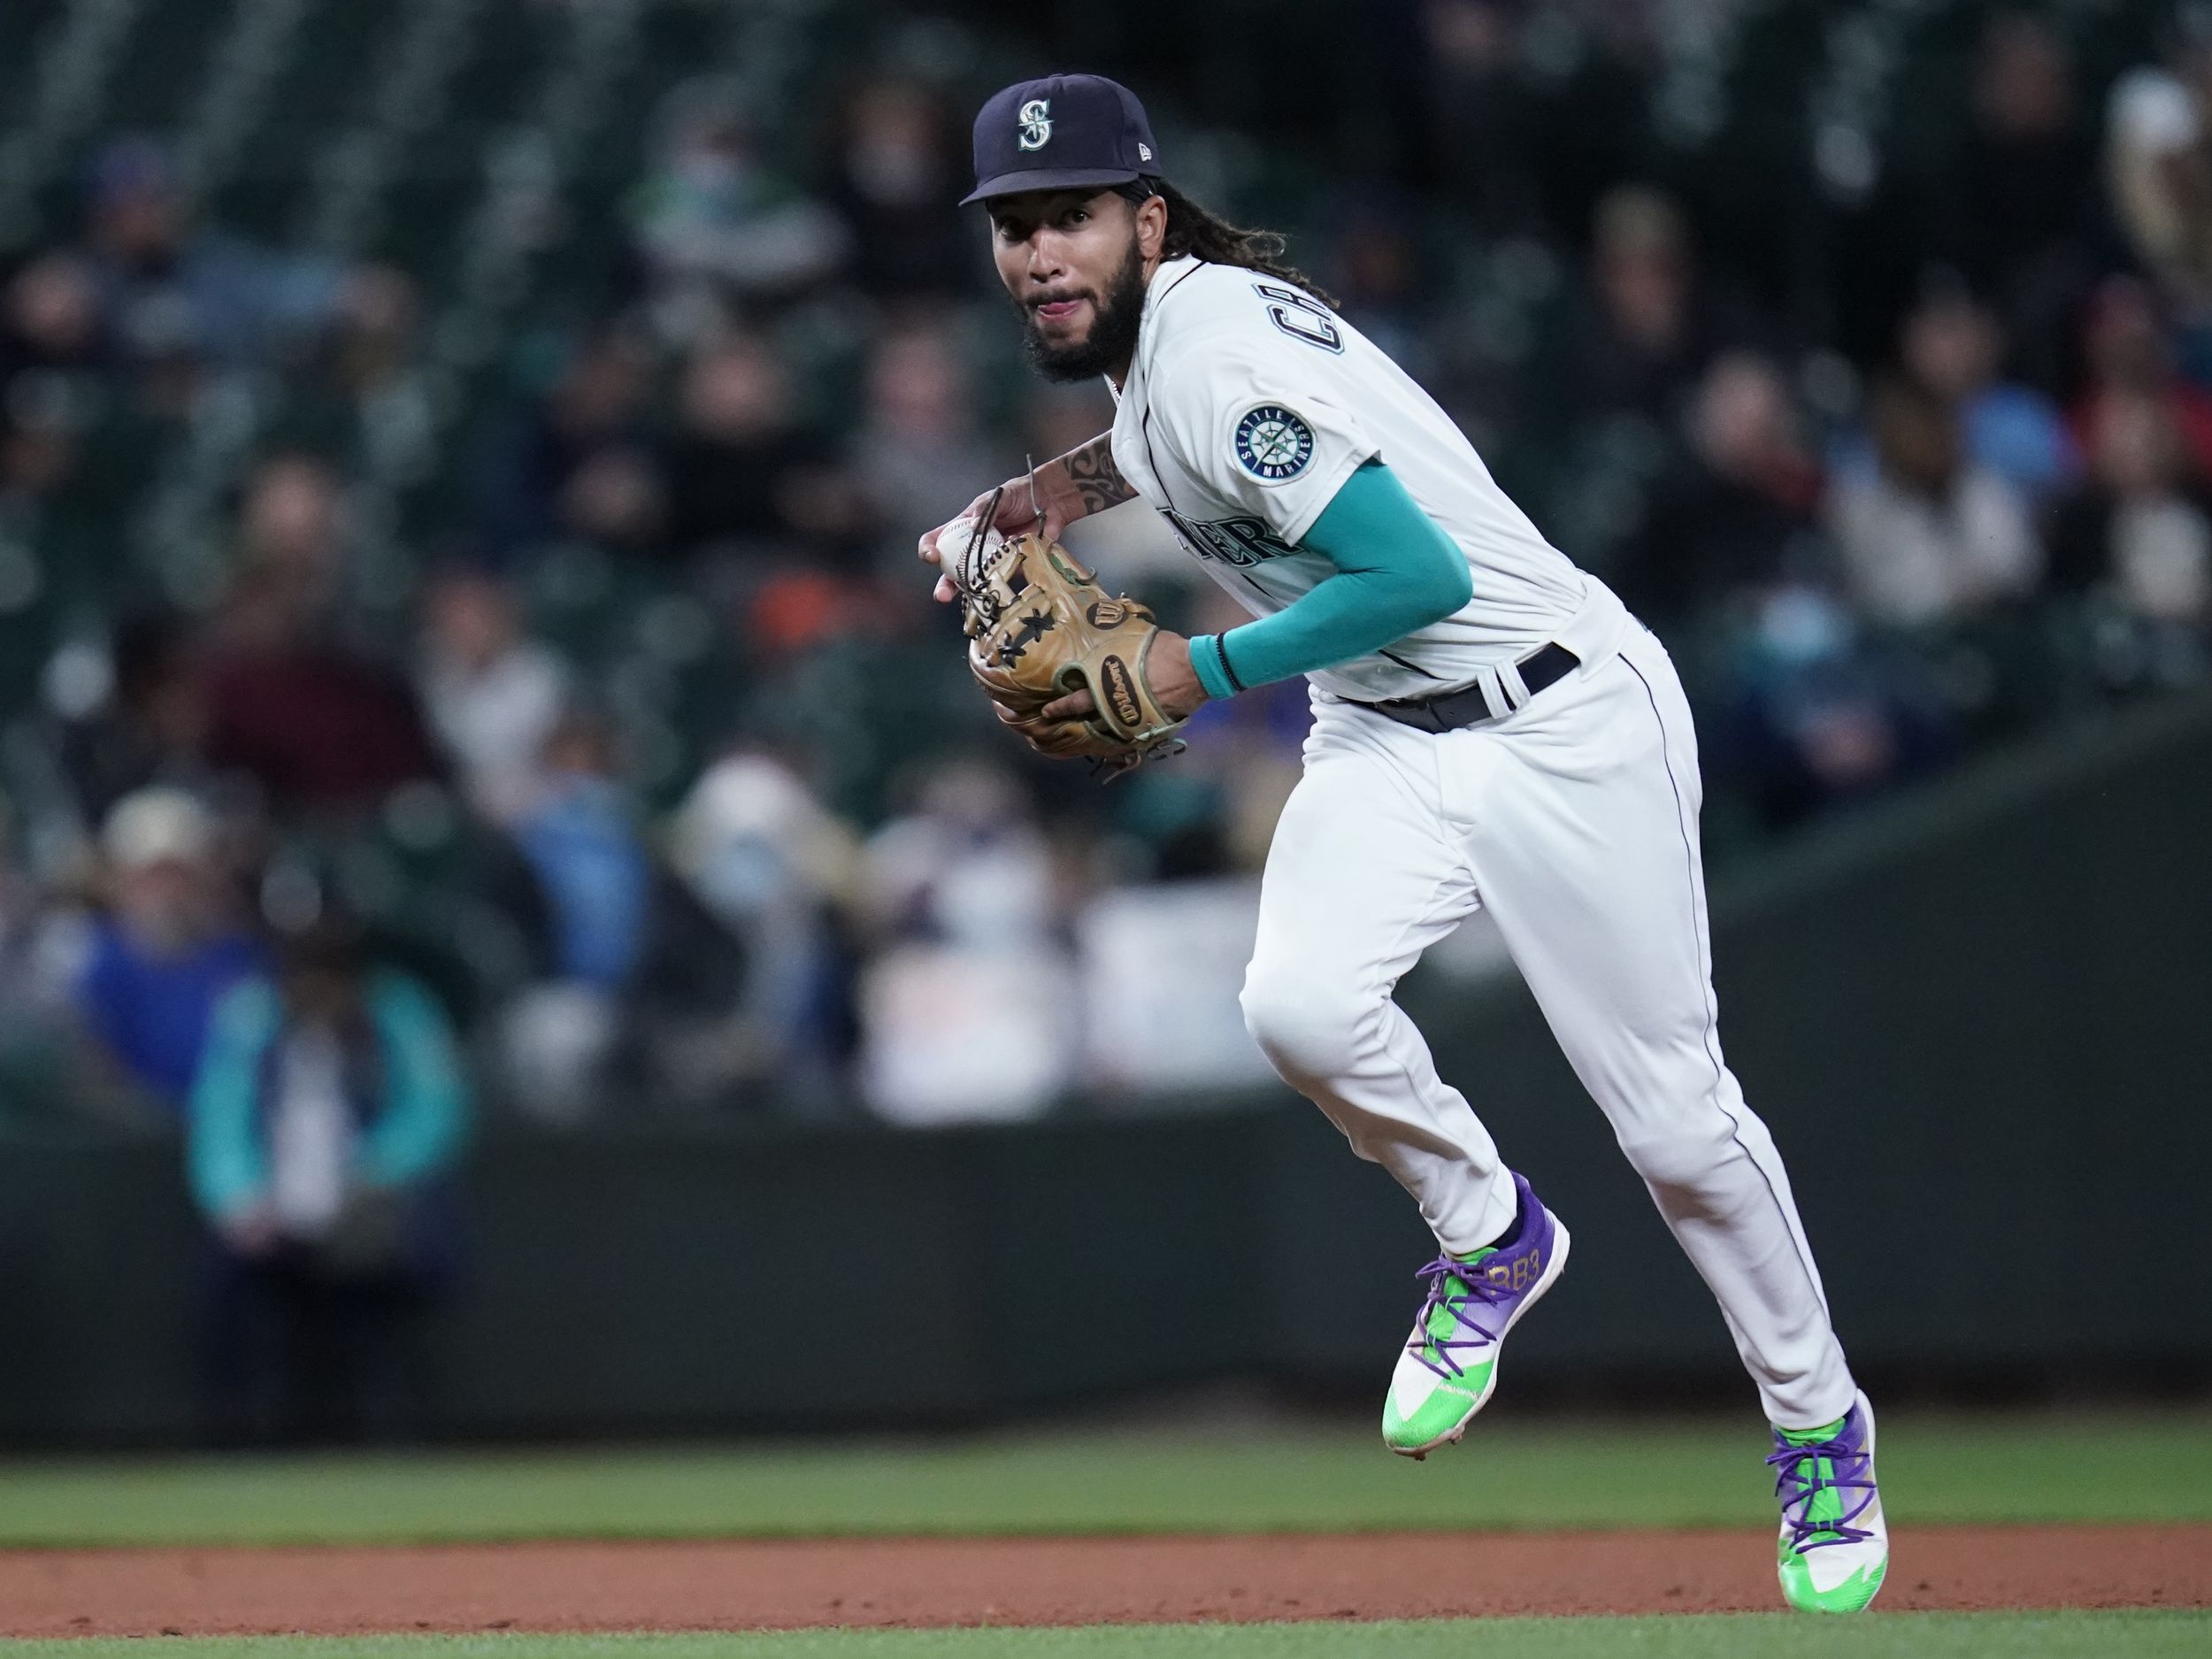 J.P. Crawford's grand slam leads Mariners to 8-0 win over Rangers -  Victoria Times Colonist